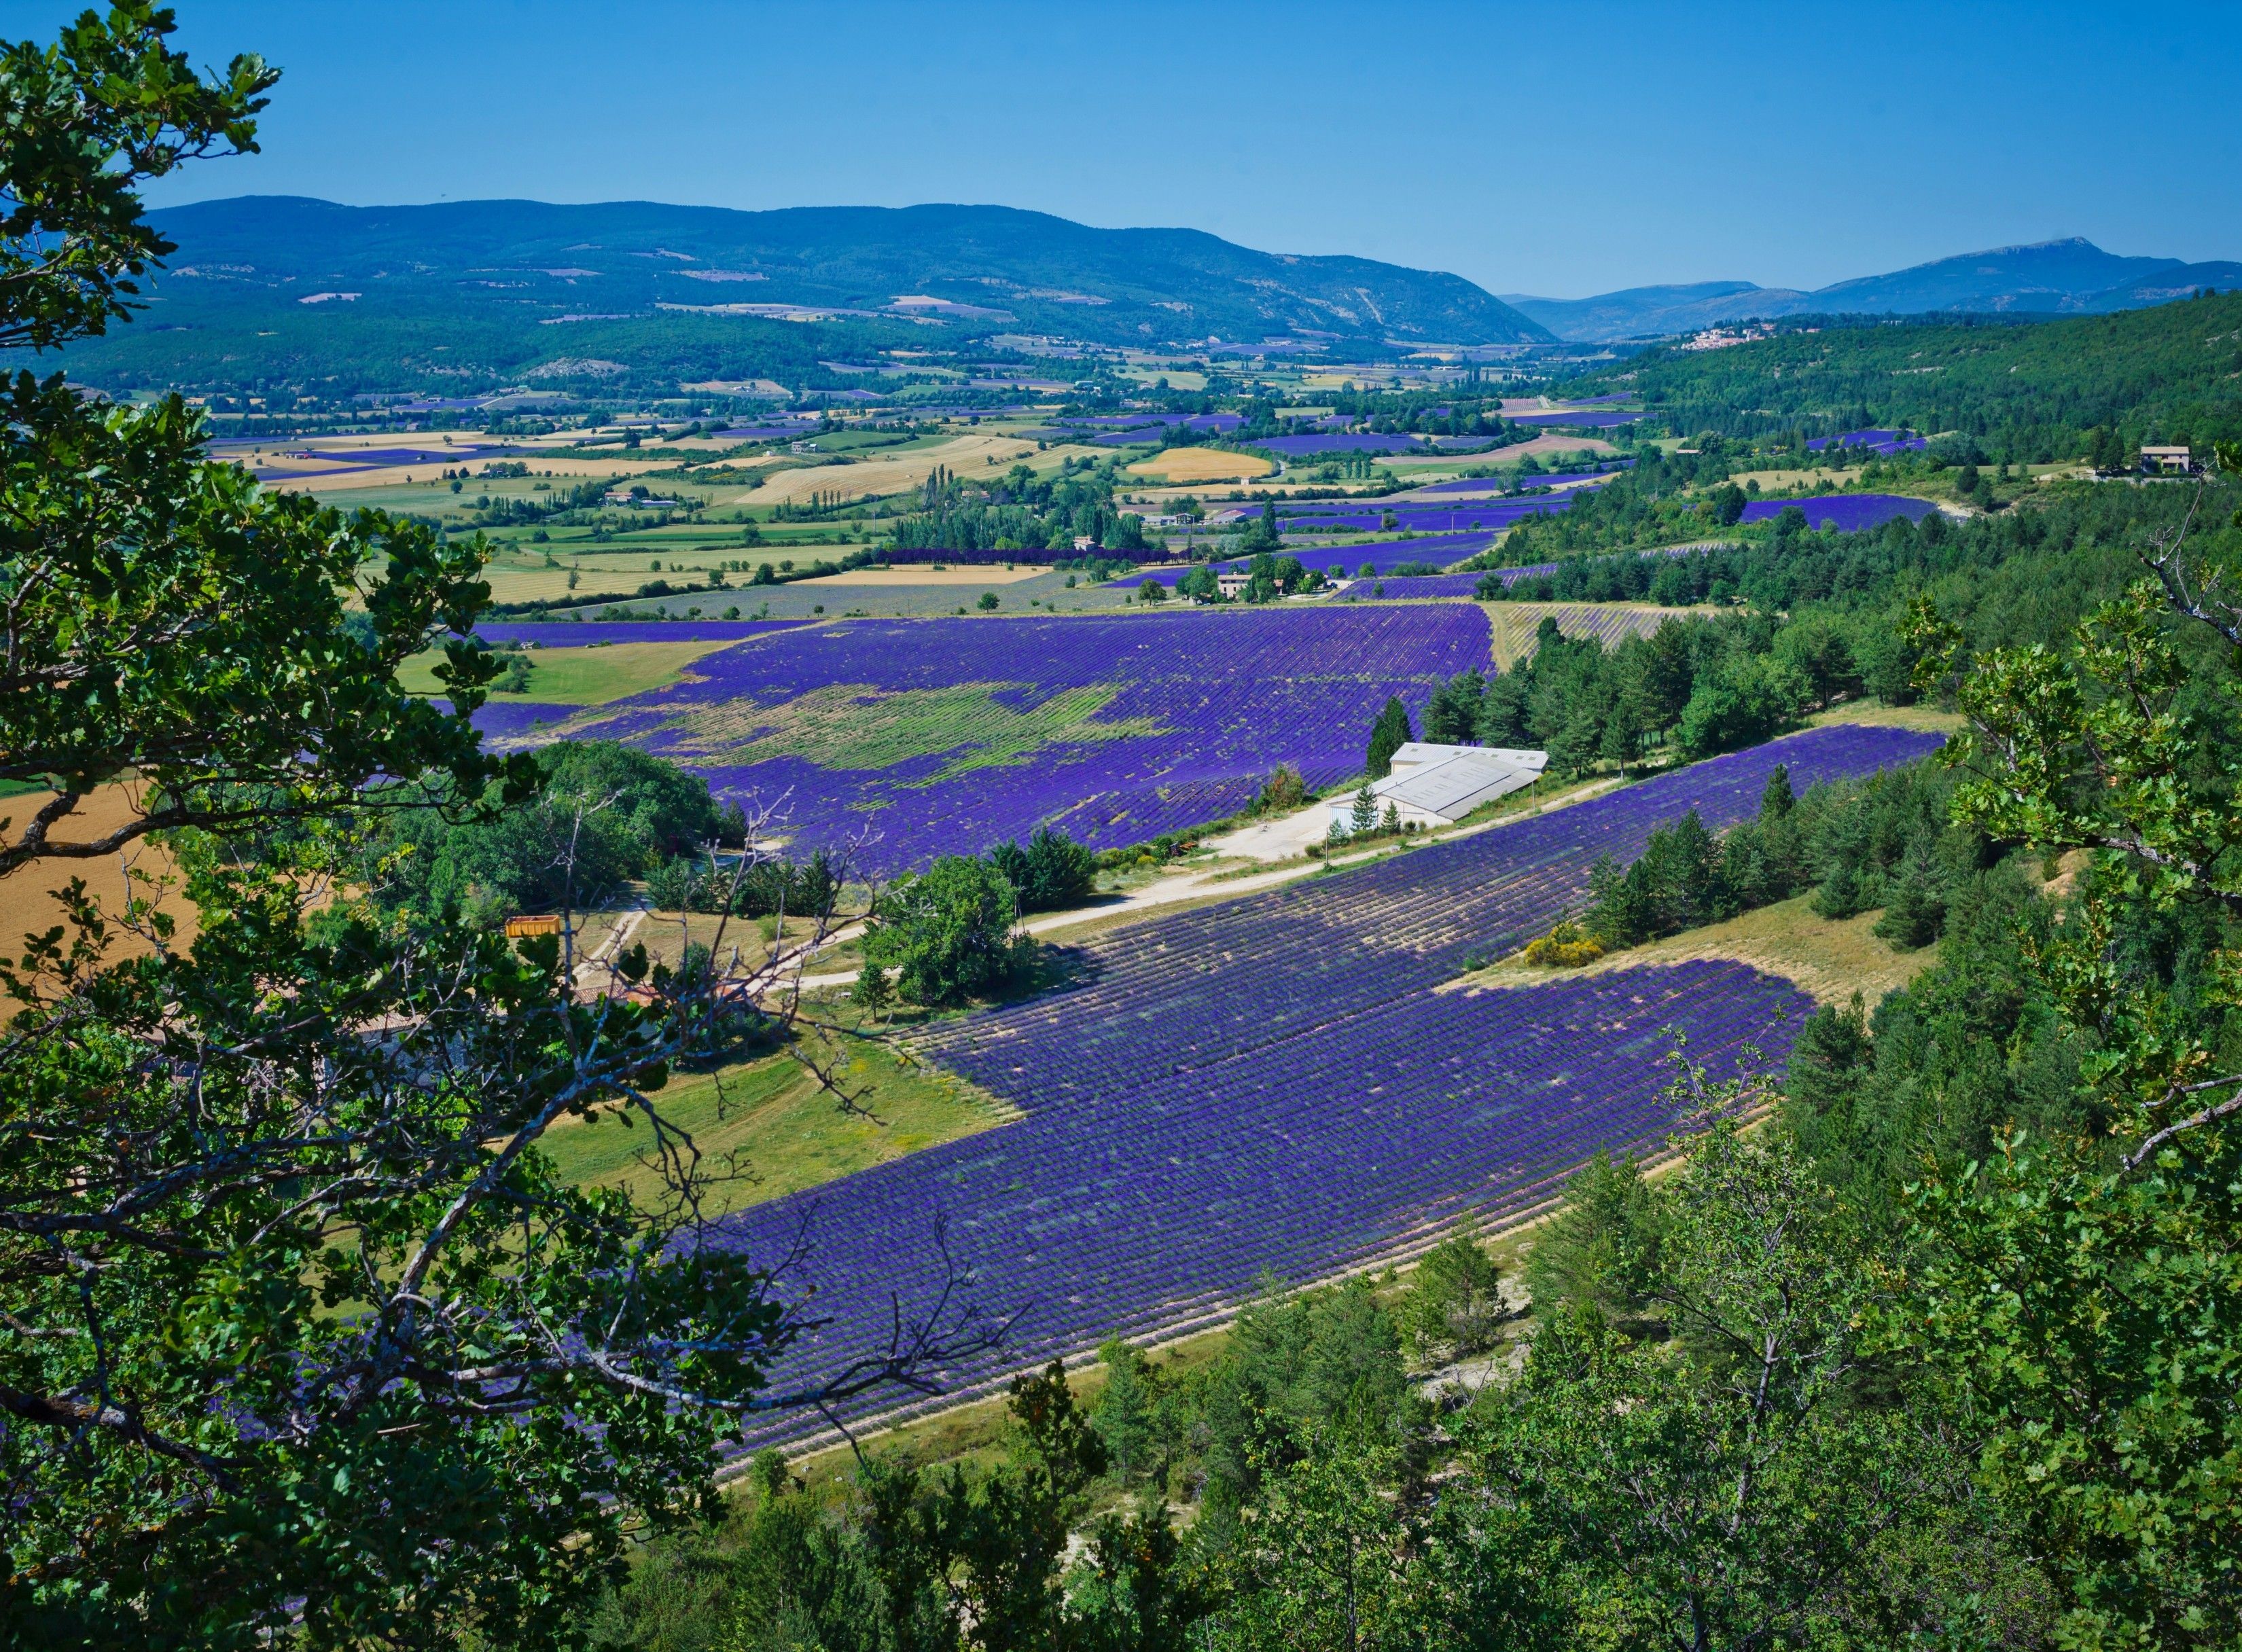 Download 3300x2432 France, Lavender, Fields, Trees, Mountain